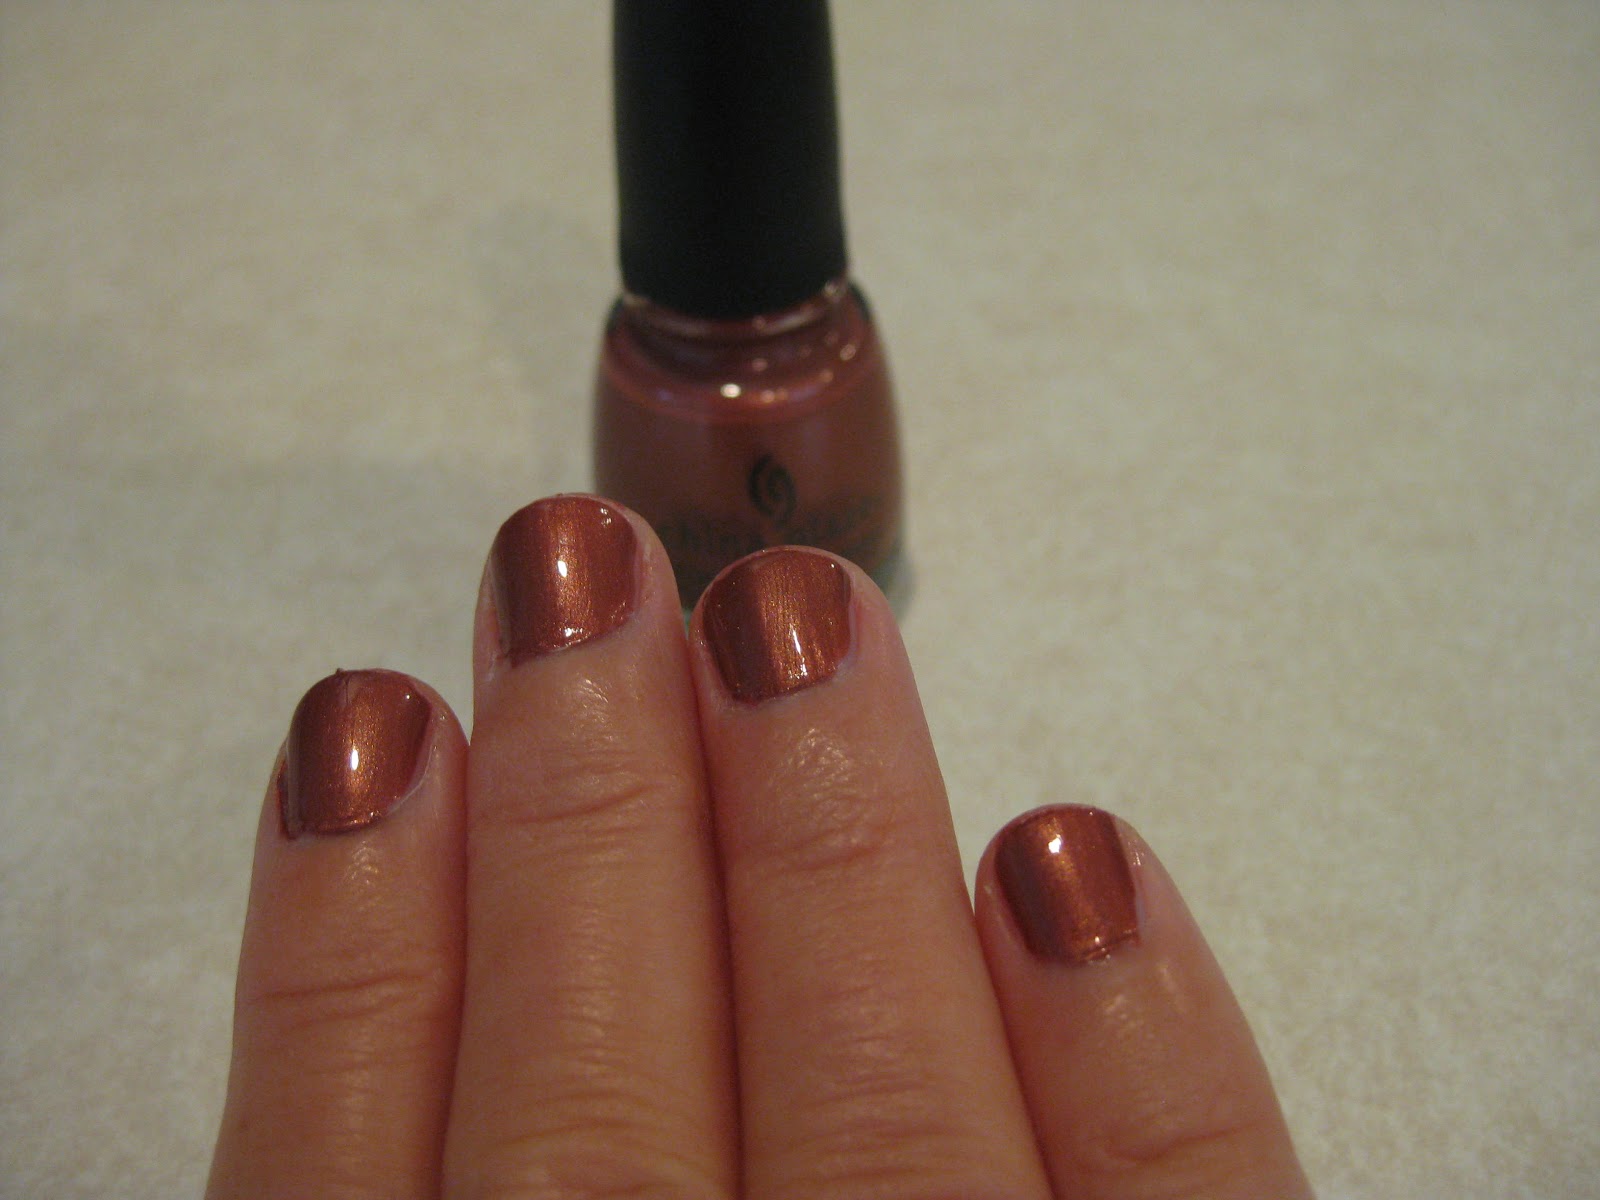 5. China Glaze Nail Lacquer in "A Touch of Color" - wide 4